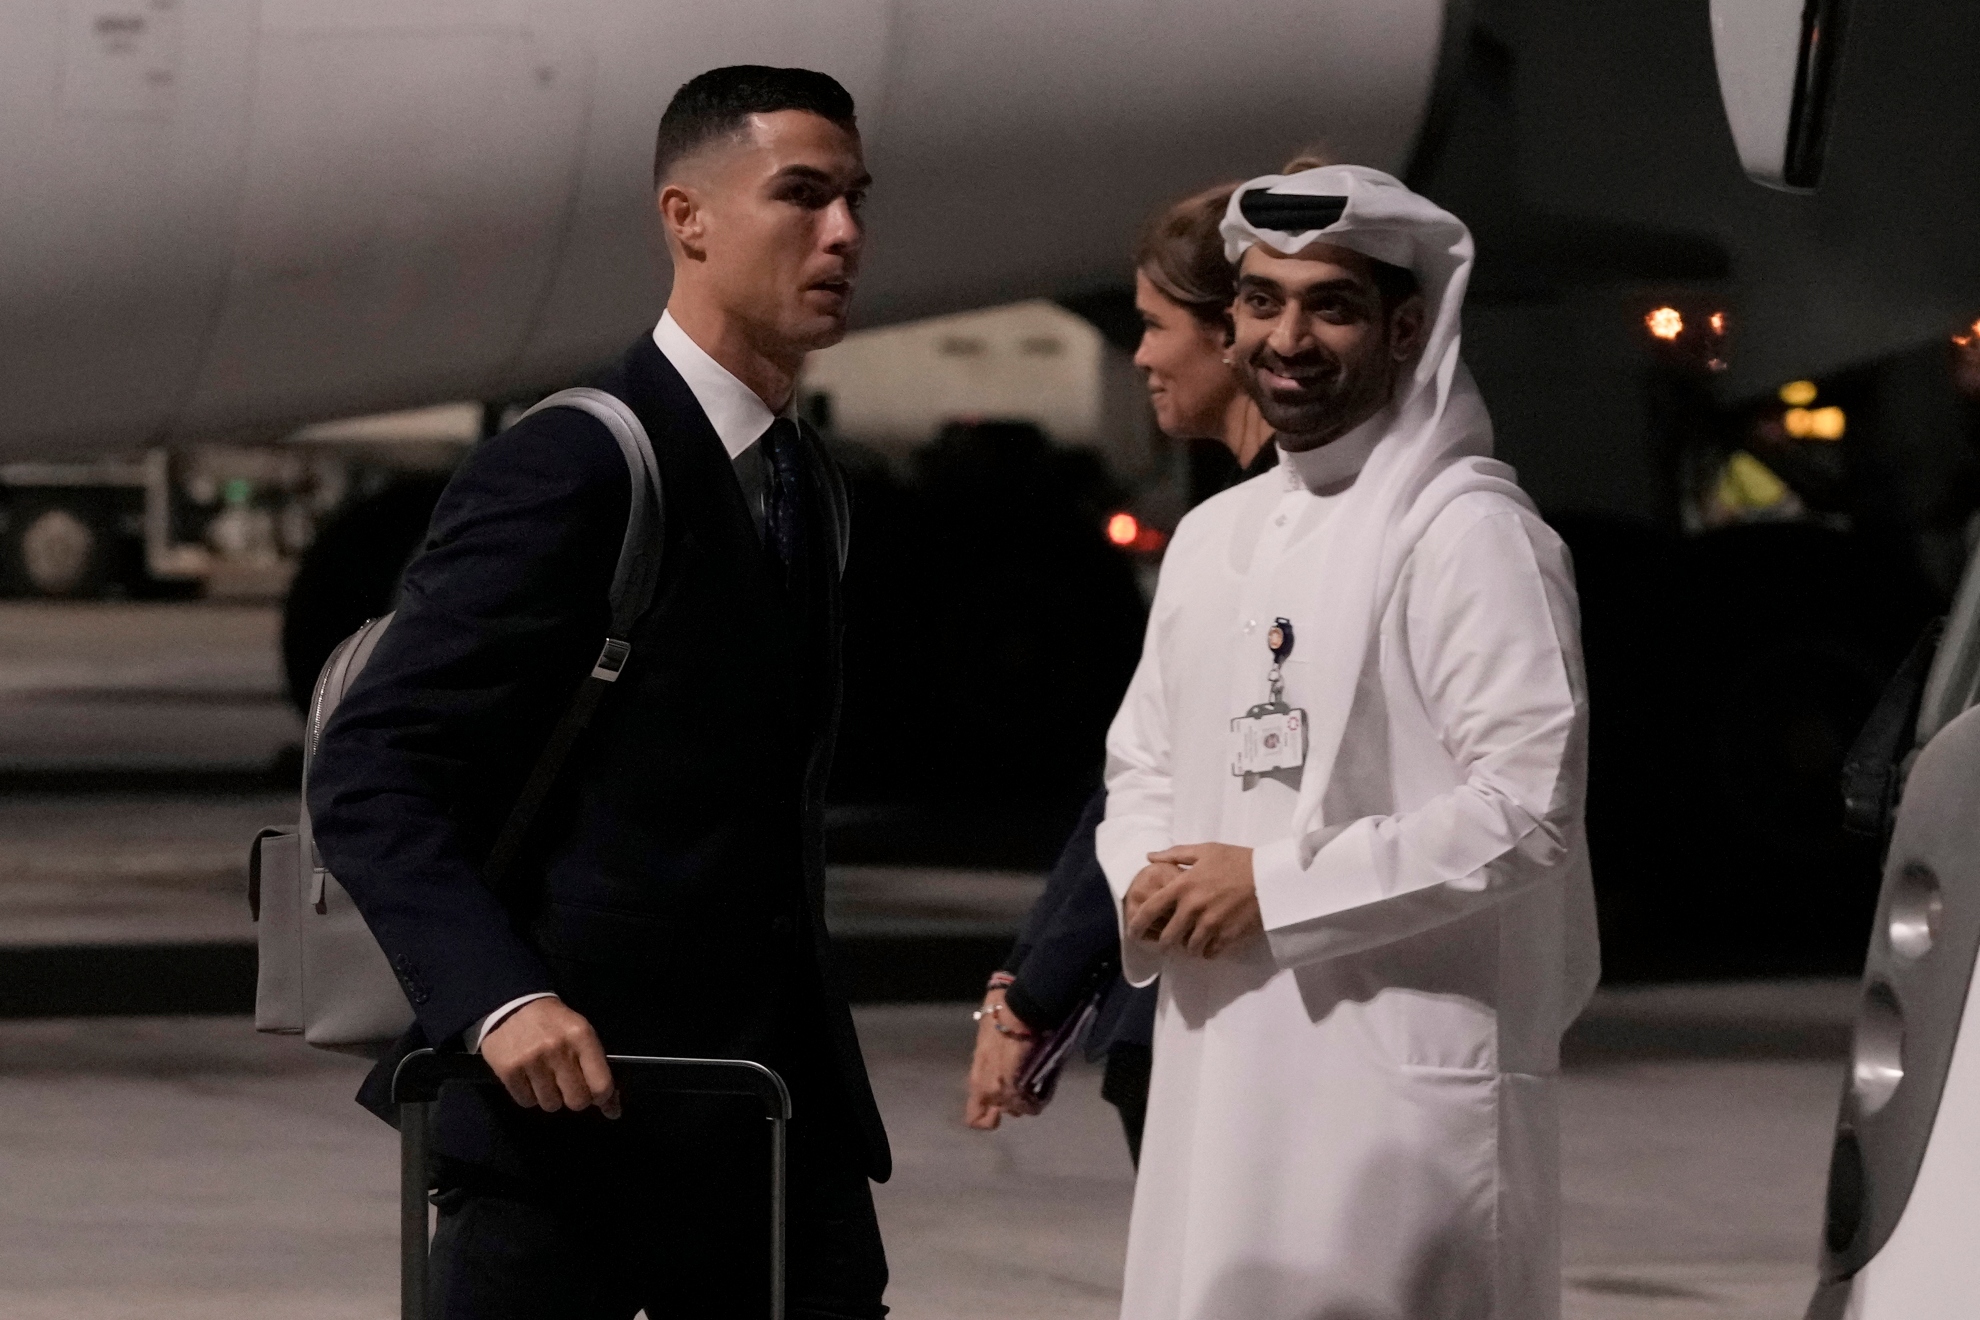 What are Cristiano Ronaldo's options in case he is sued for breach of contract? Is Qatar in the purview?